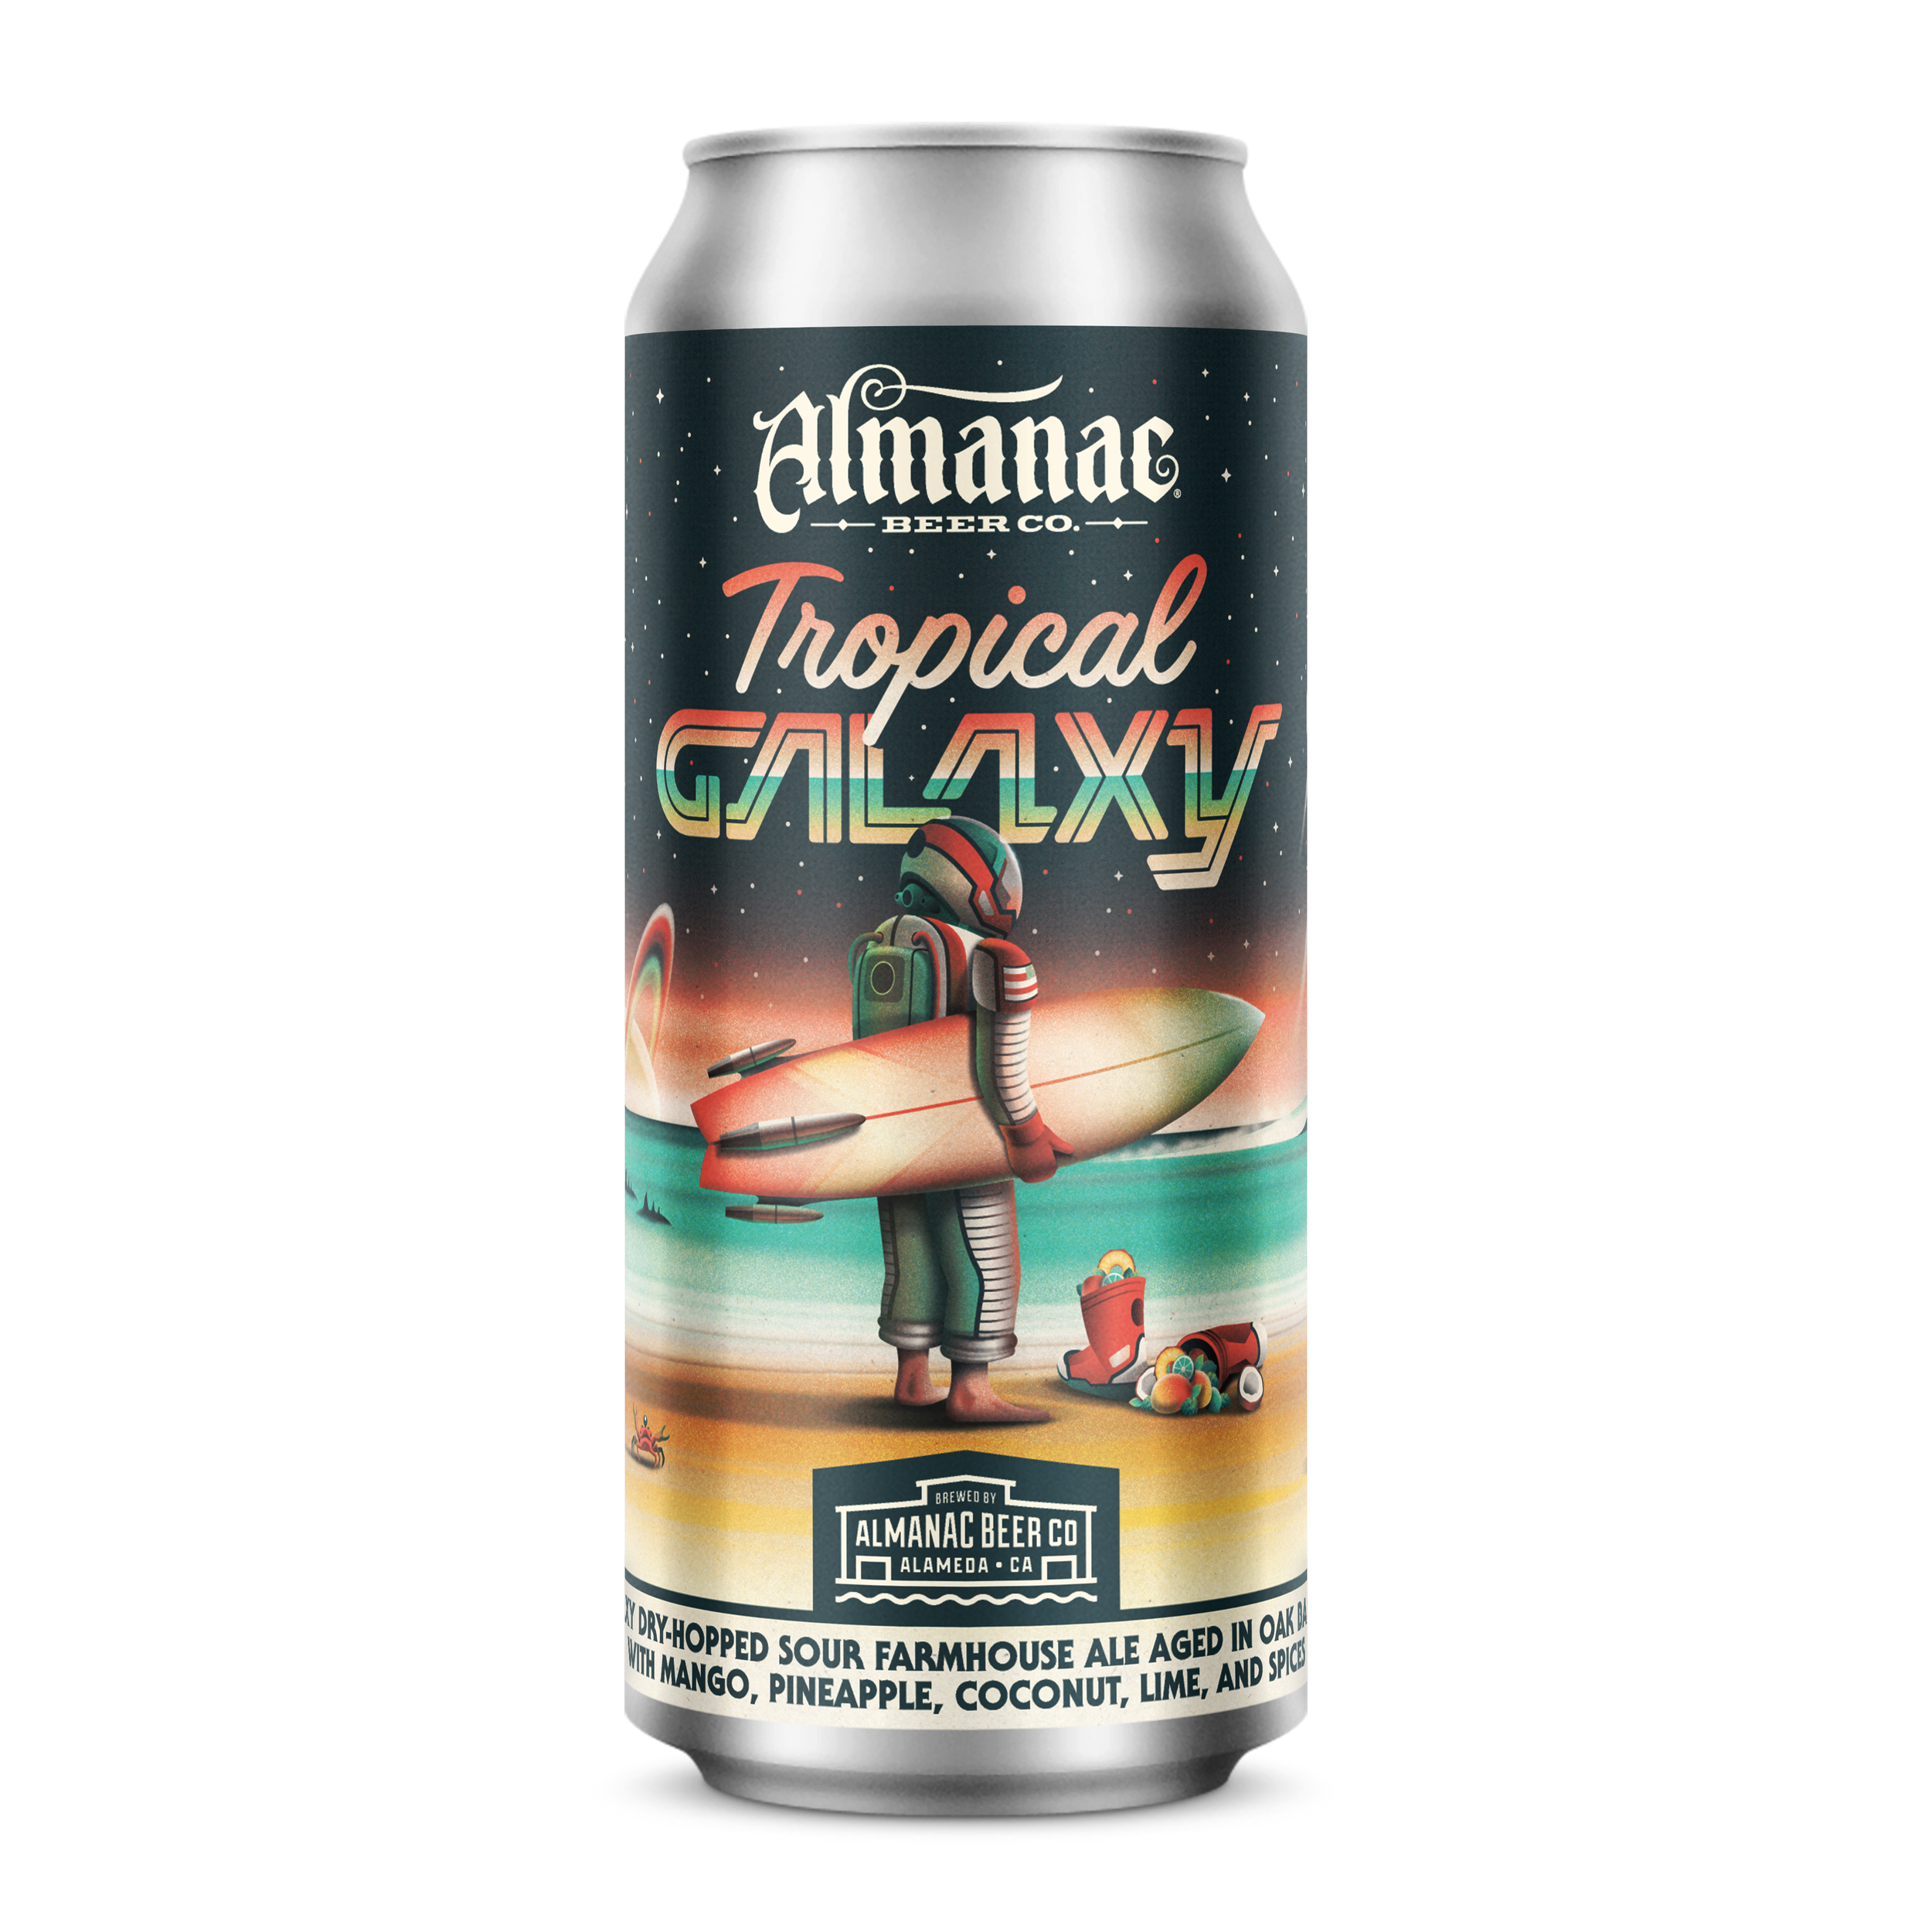 Almanac Tropical Galaxy Beer Can Design by DKNG